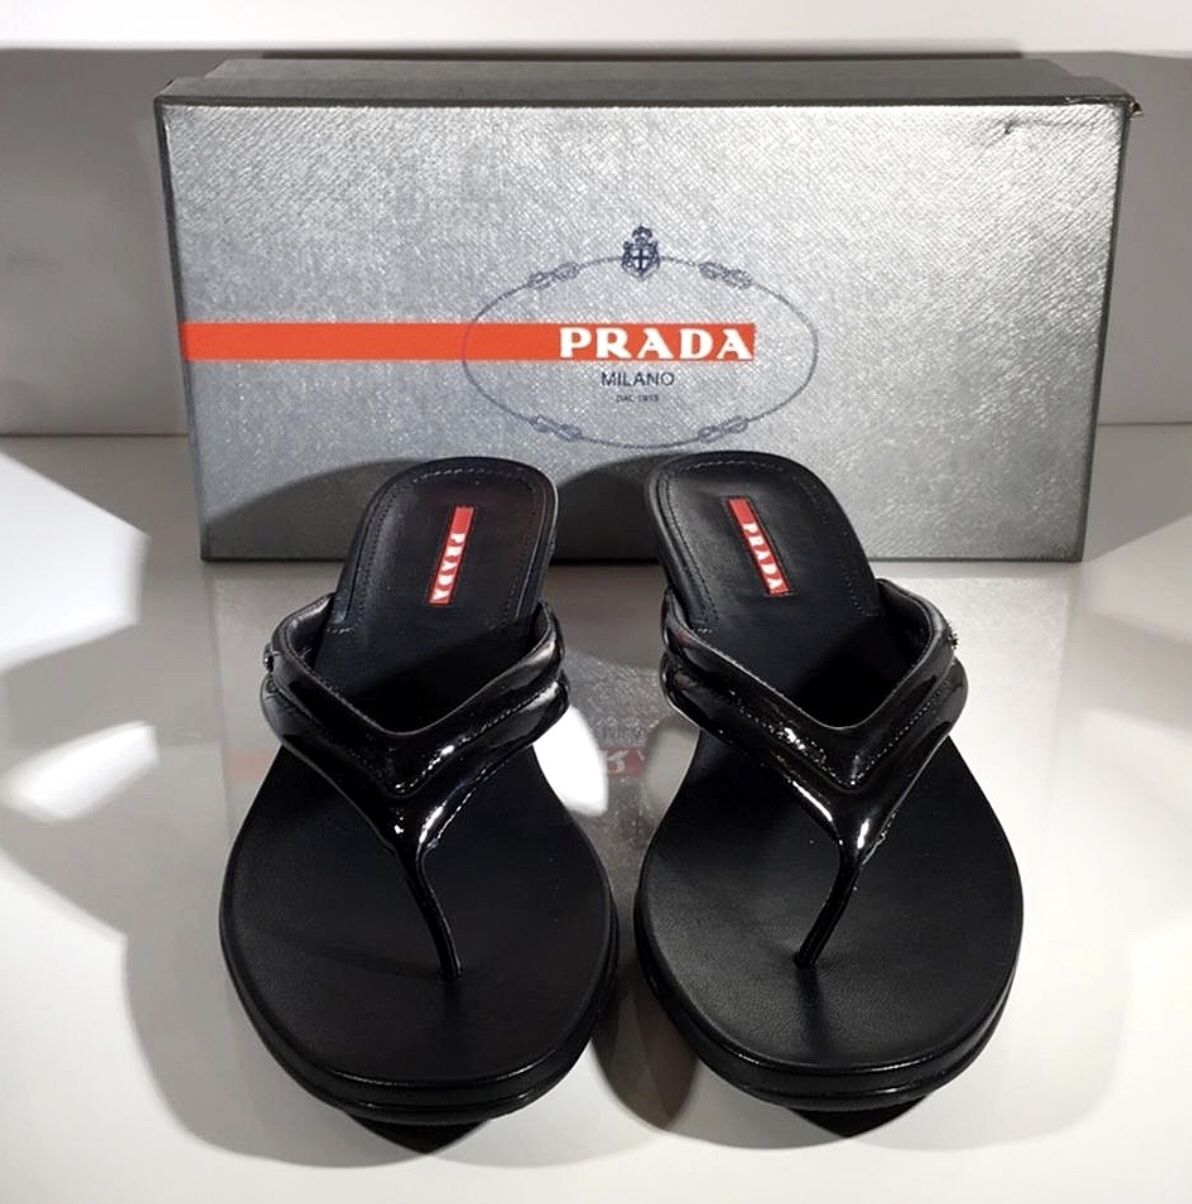 Women’s Prada sandal paid $620 great condition 100% authentic #3Y5823 Calzature Donna. Box not included. Black Leather Low Heel height approx. 2.25"